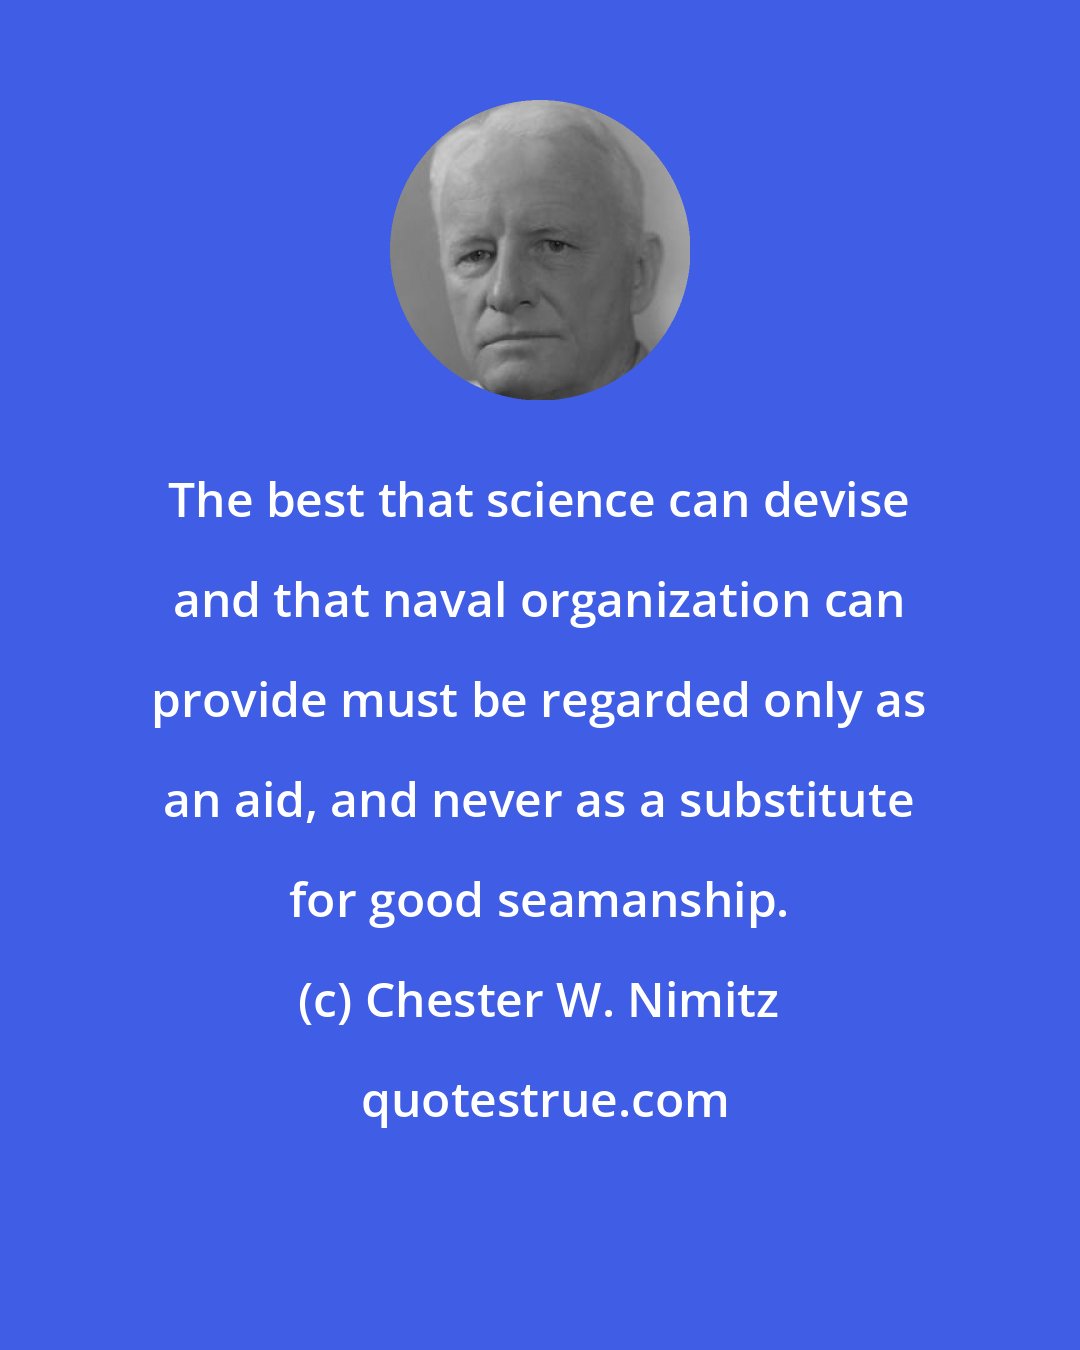 Chester W. Nimitz: The best that science can devise and that naval organization can provide must be regarded only as an aid, and never as a substitute for good seamanship.